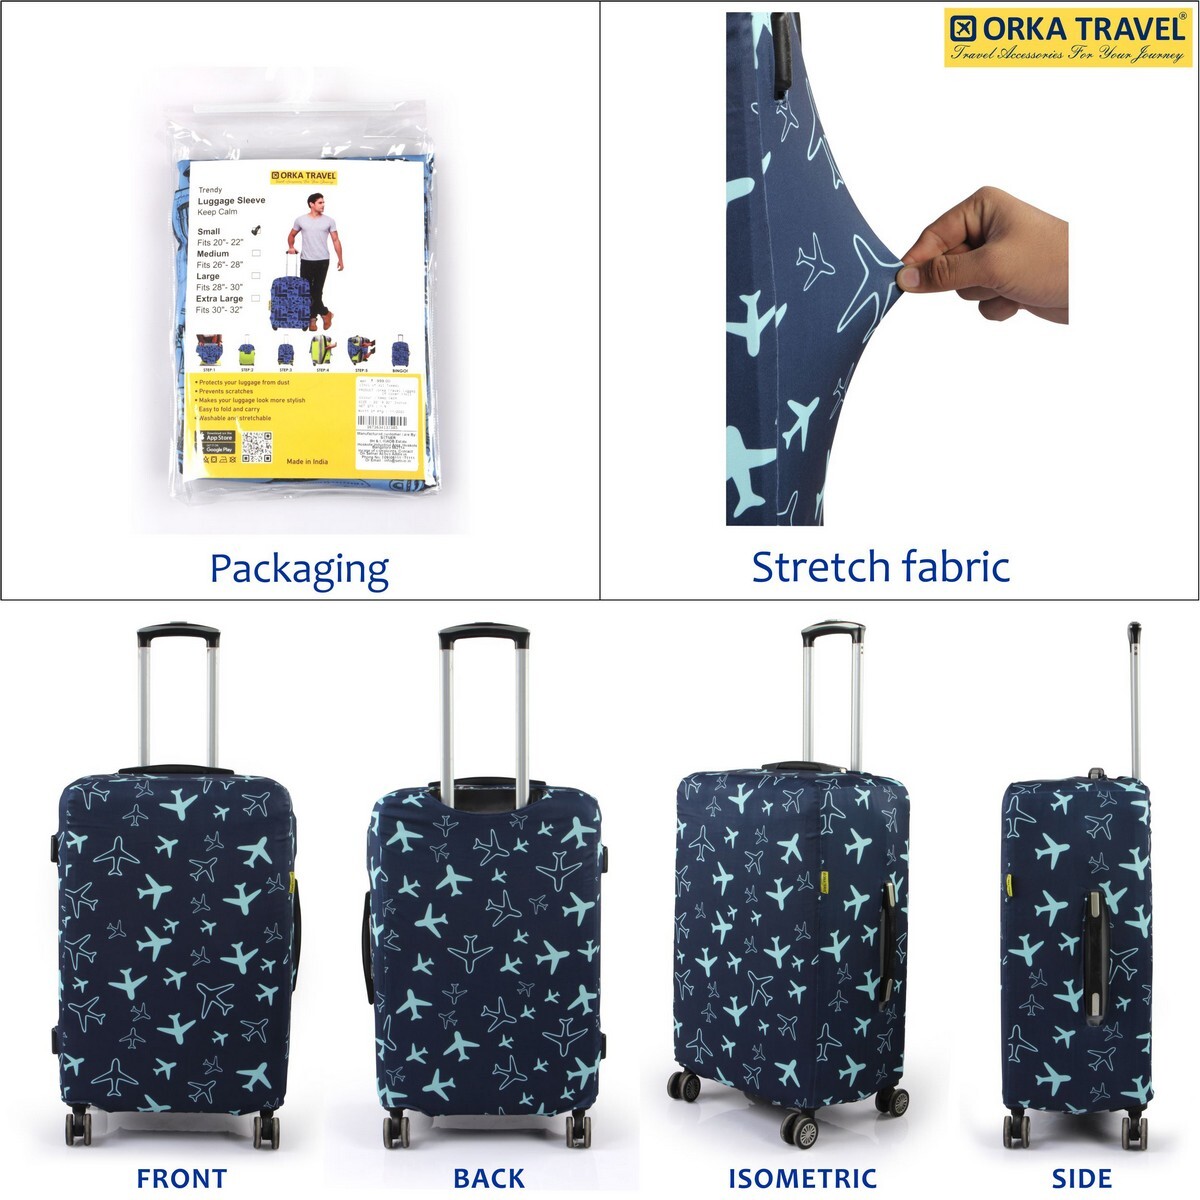 Orka Luggage Cover Printd Small